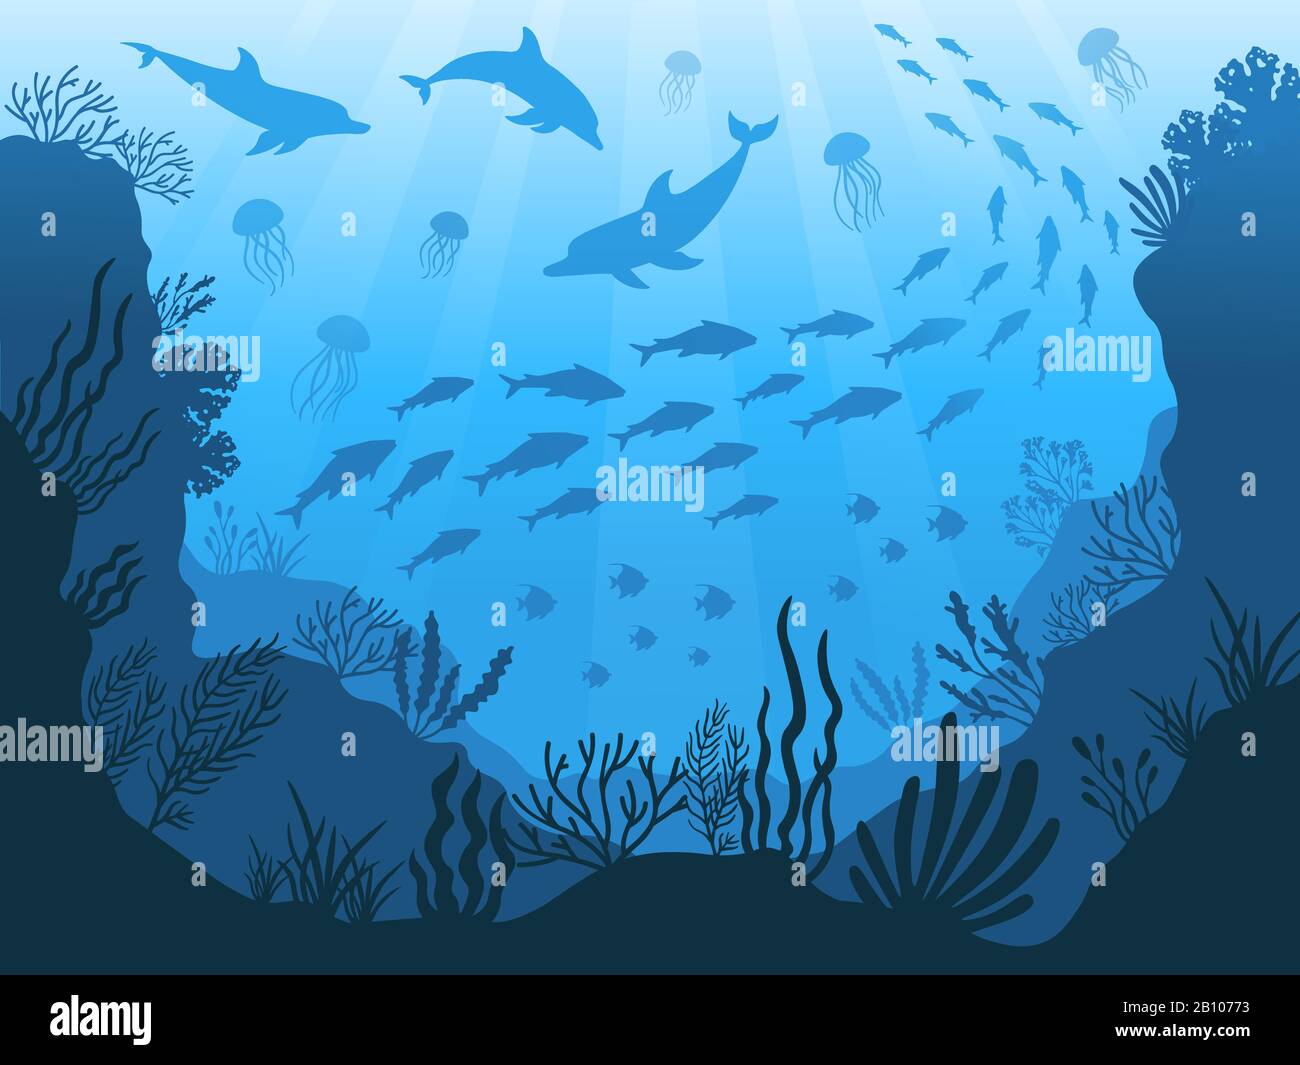 Underwater ocean fauna. Deep sea plants, fishes and animals. Marine seaweed, fish and animal silhouette vector background illustration Stock Vector